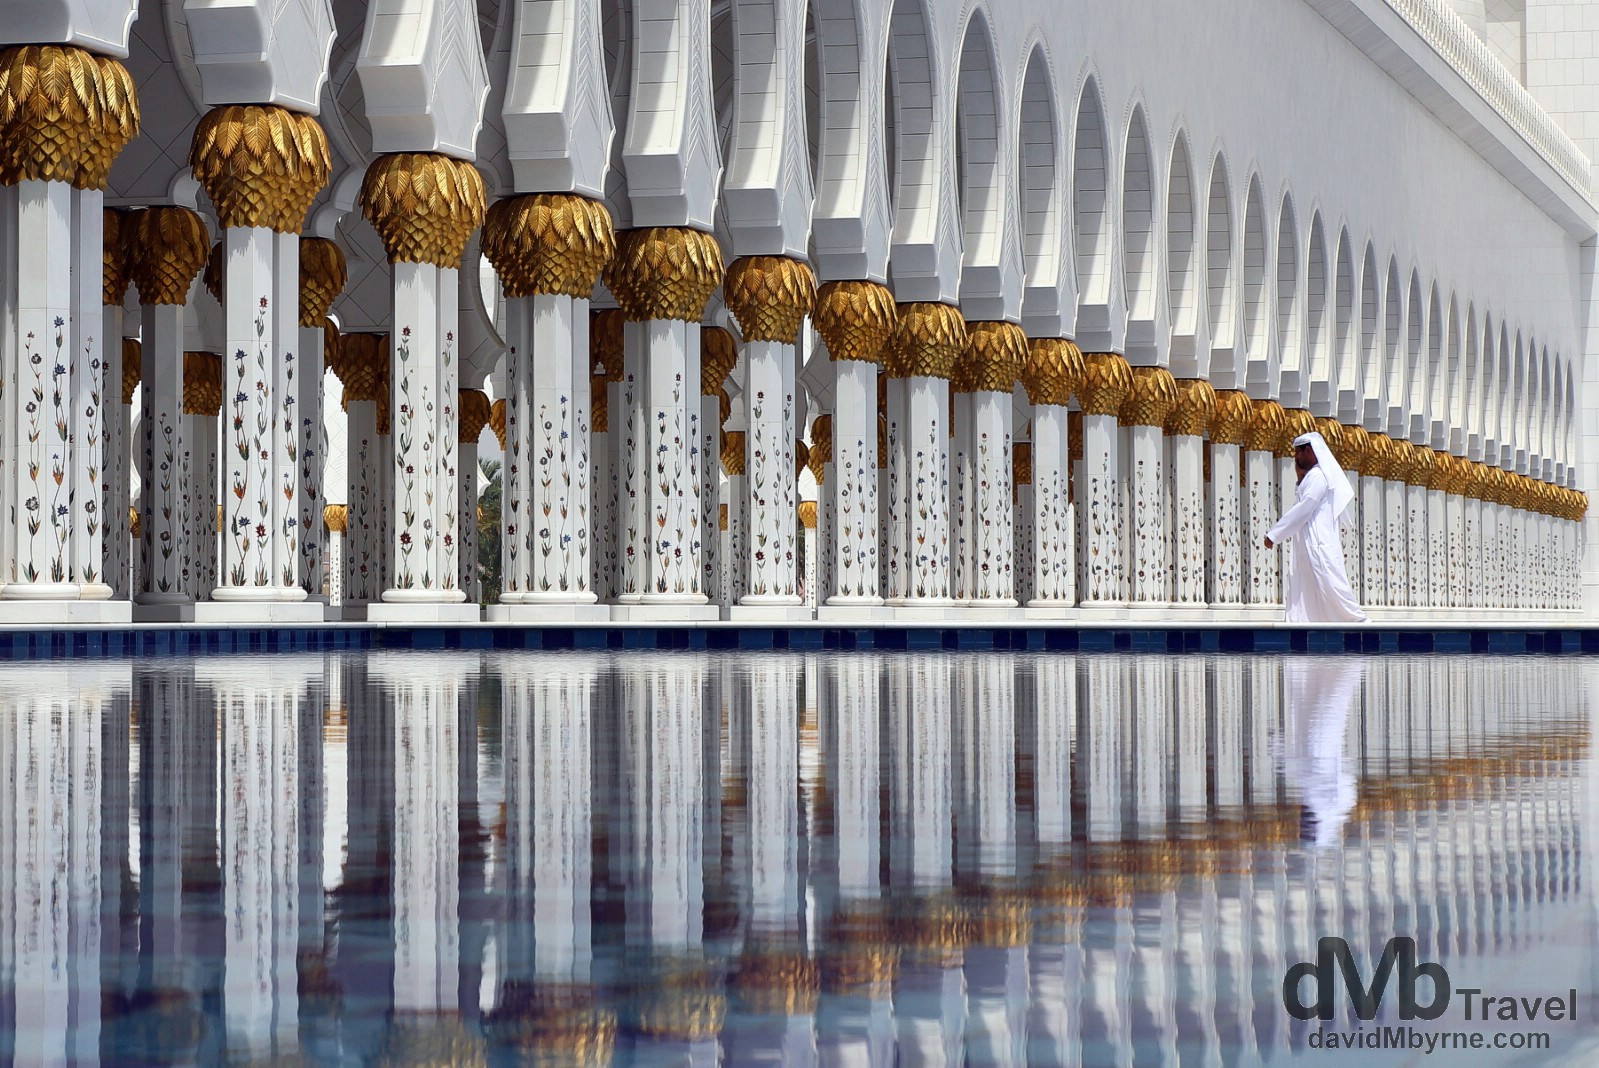 Reflections and repetition. Sheikh Zayed Grand Mosque, Abu Dhabi, UAE. April 23rd, 2014.